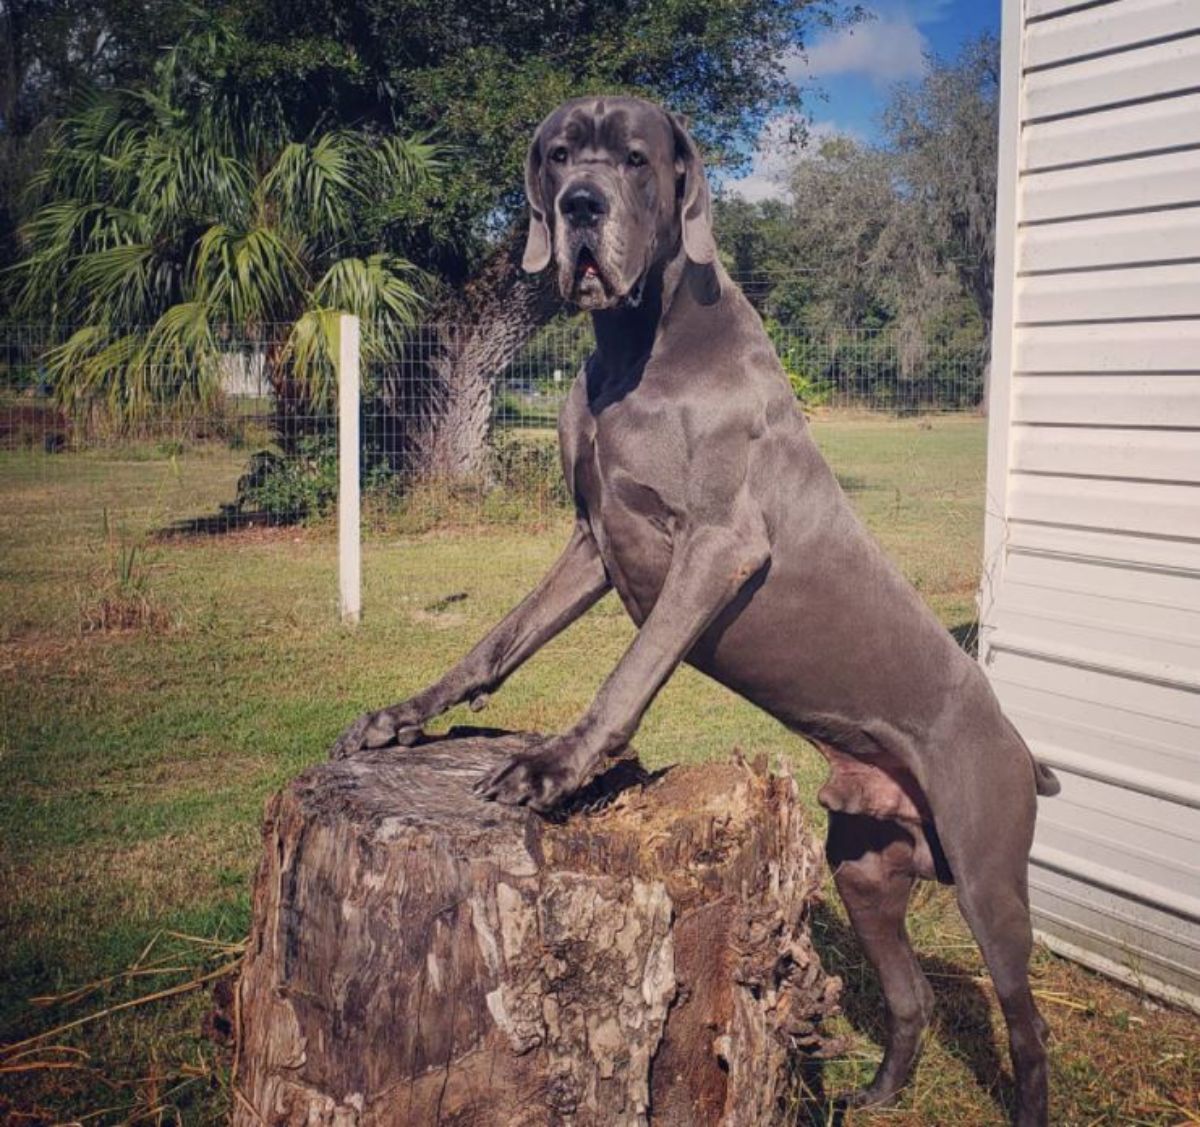 Blue great dane dog standing while its hands are on top of a tree trunk